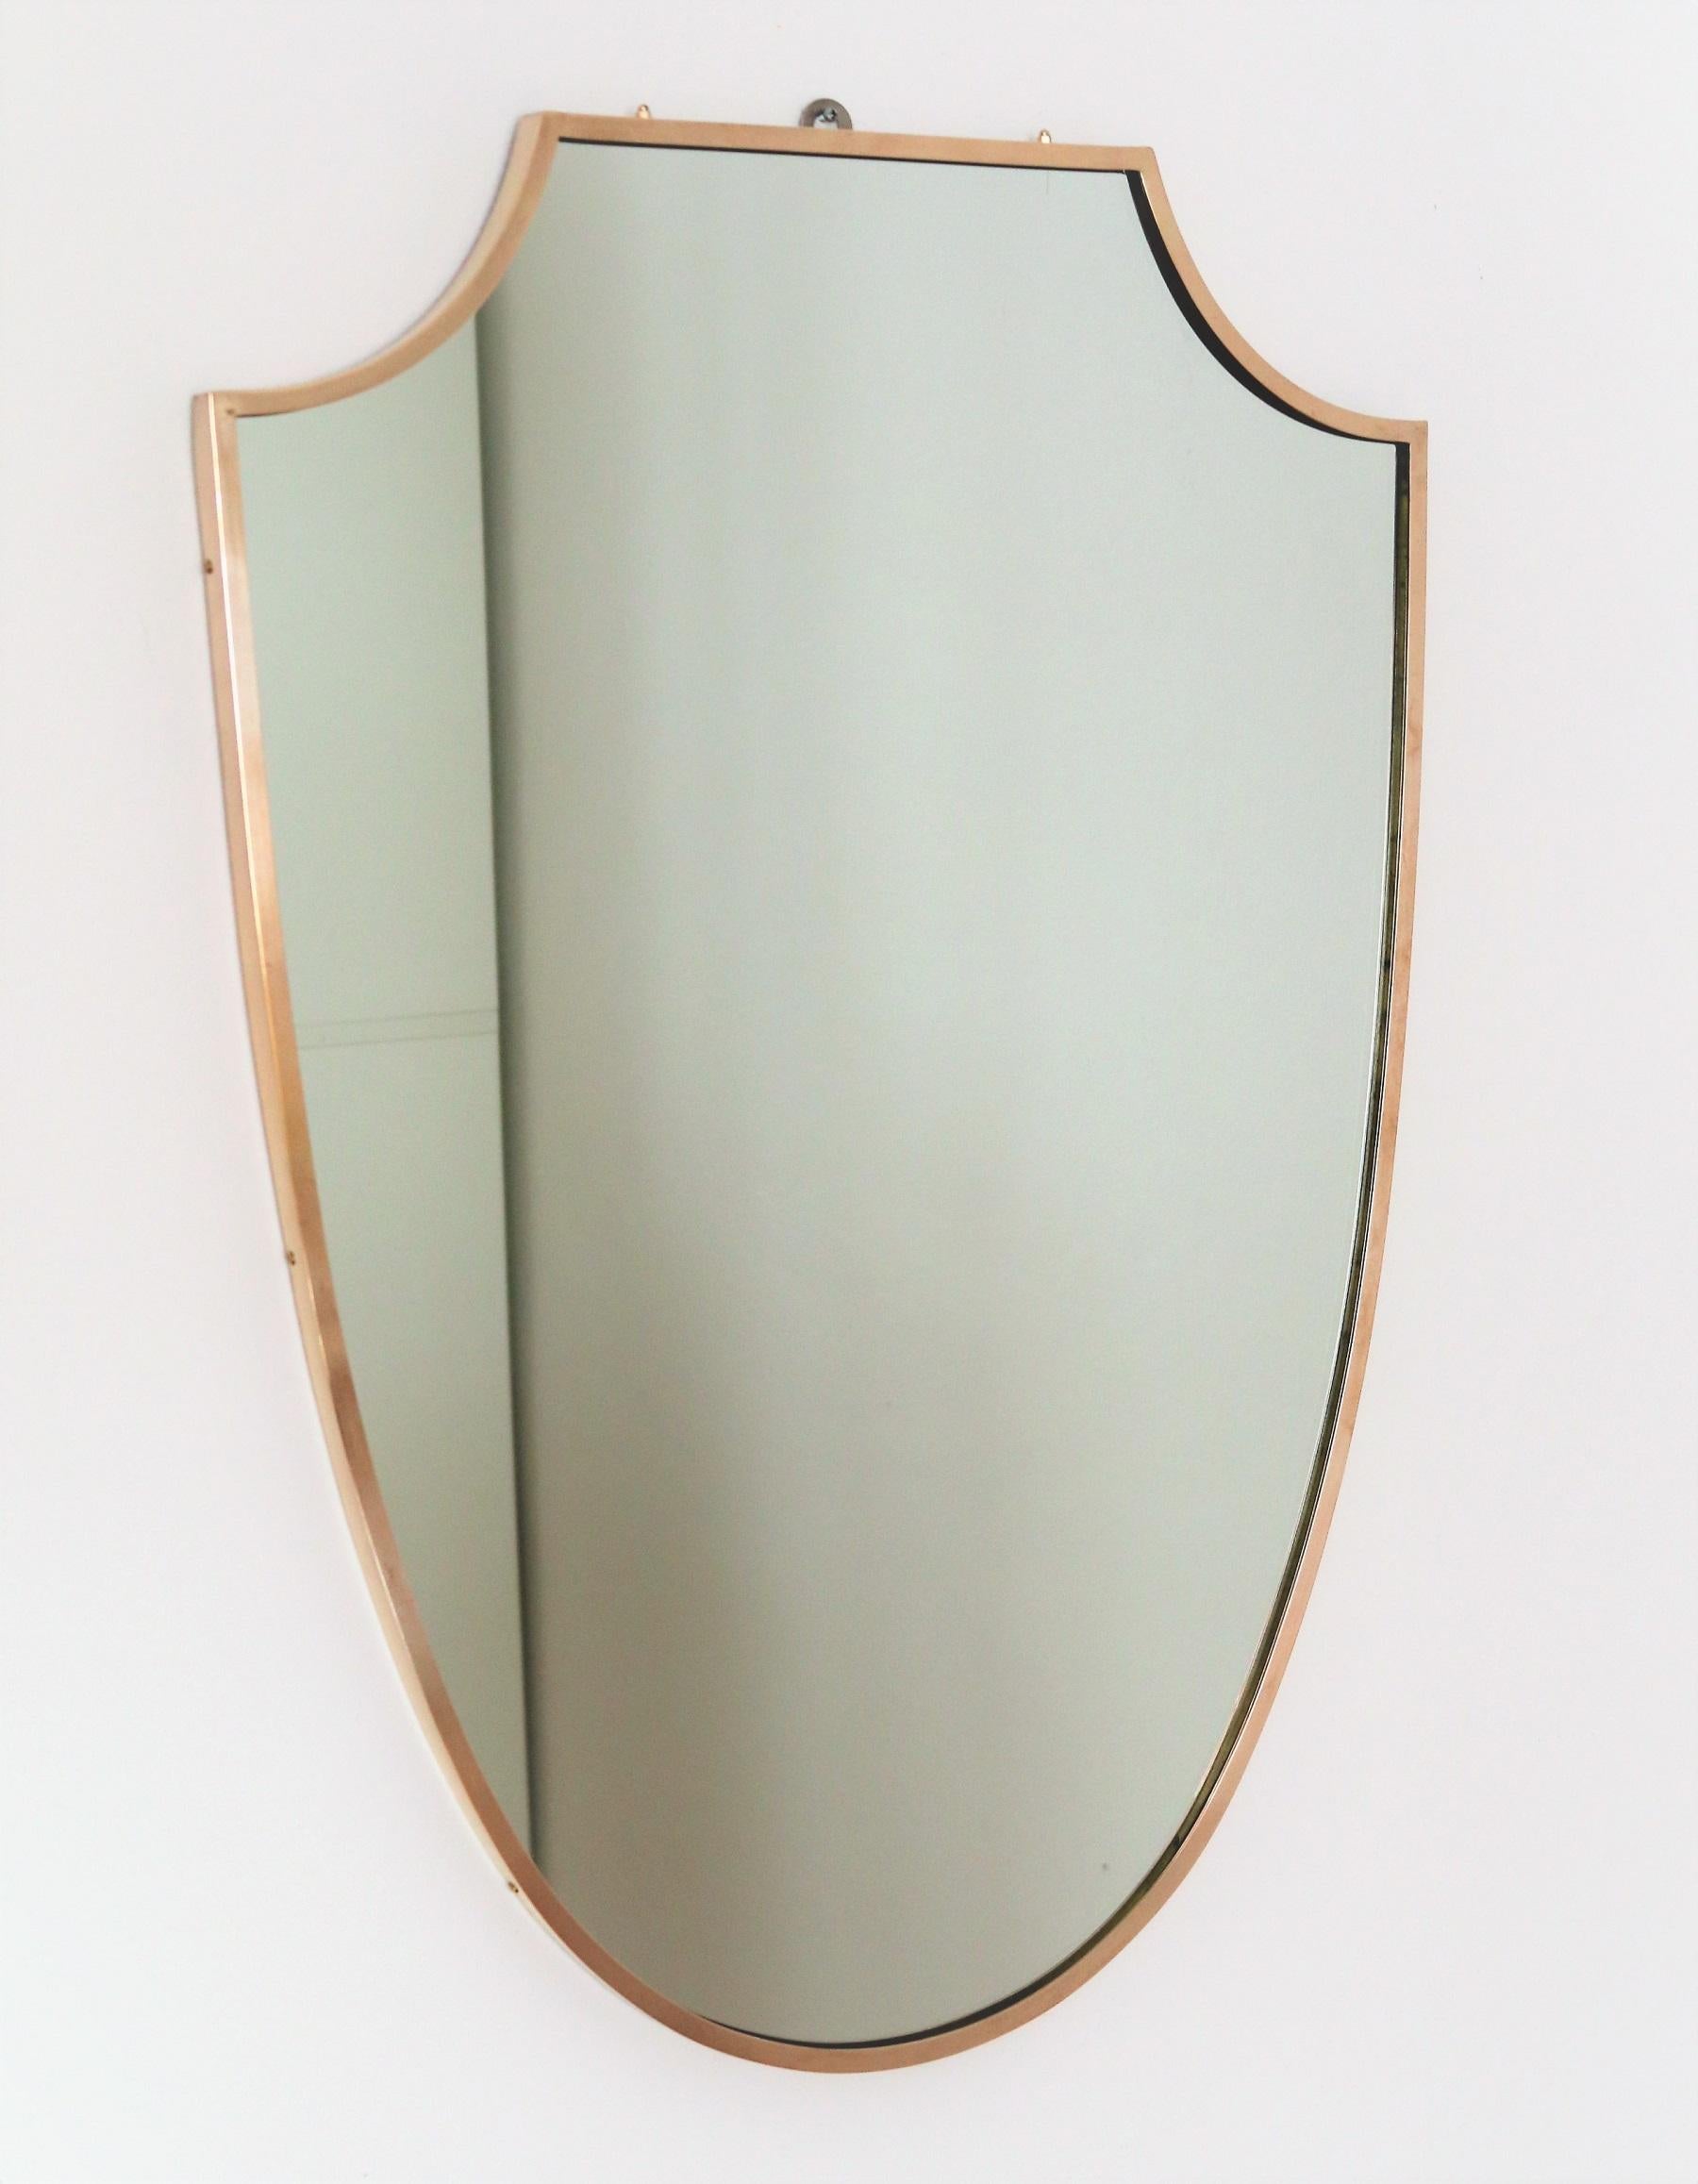 Beautiful and heavy Italian crystal glass mirror with shiny full brass frame in elegant 